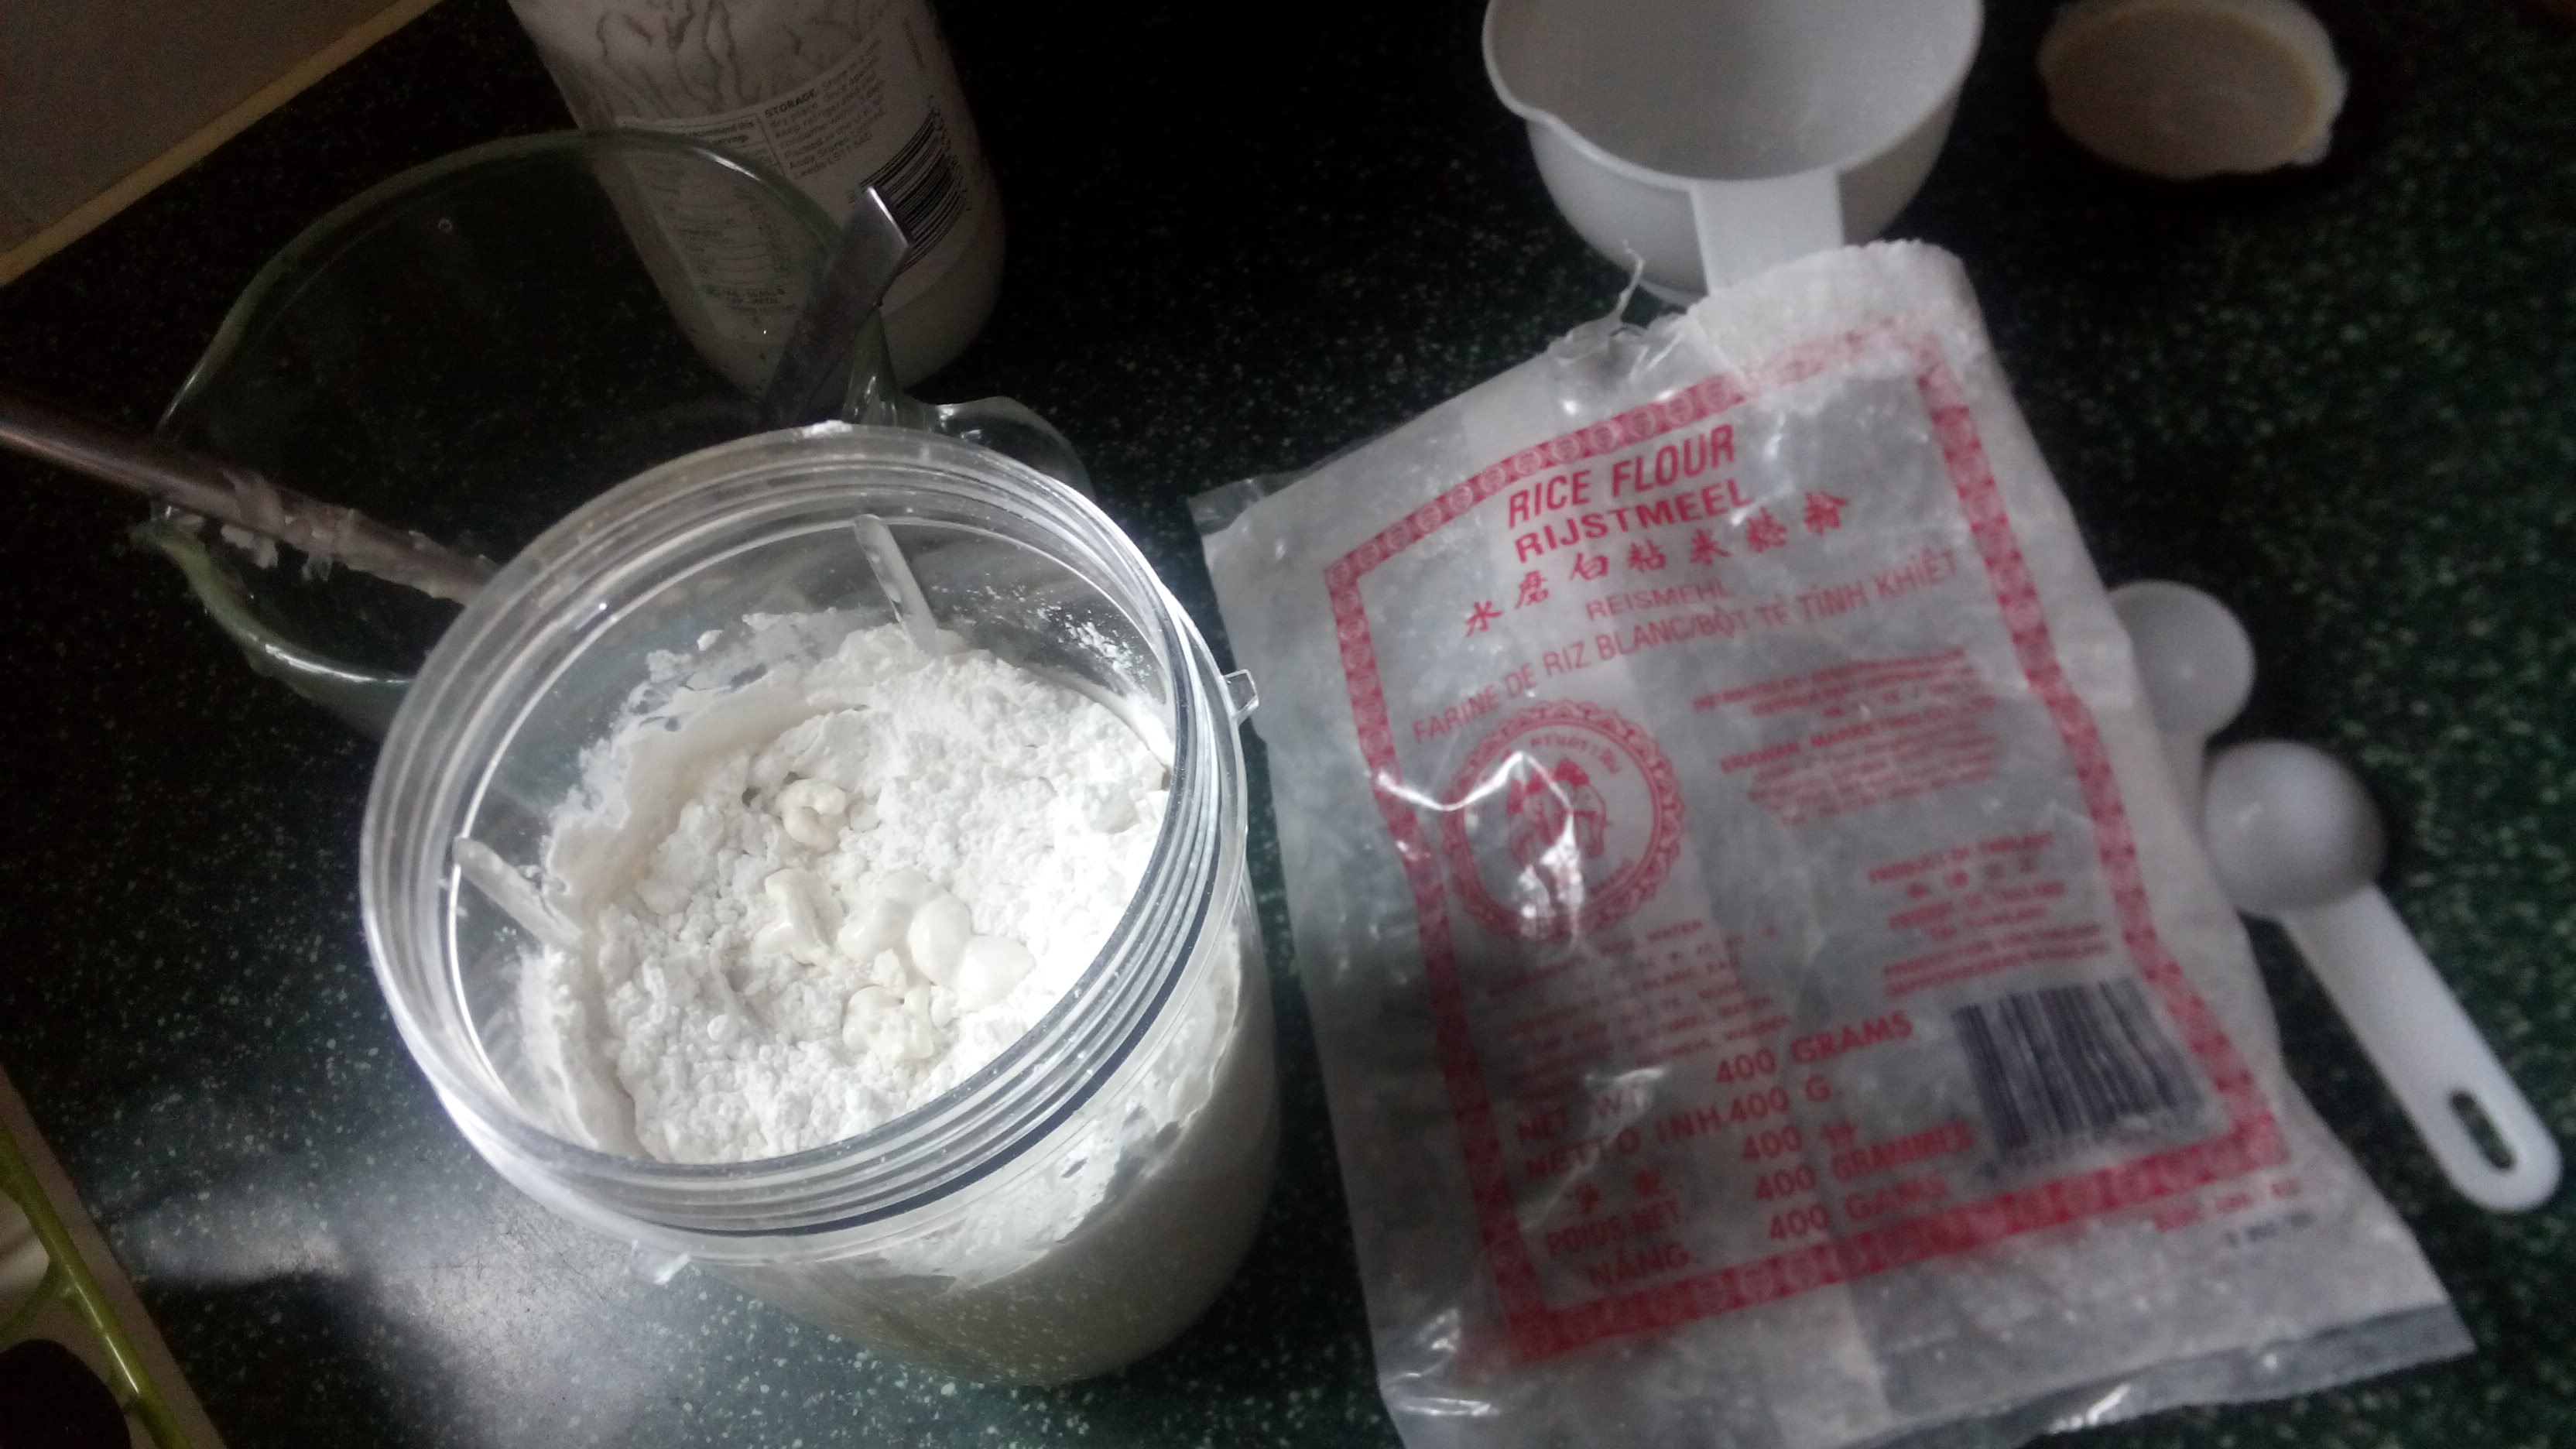 an empty rice flour bag beside a blender jug containing various white powders and liquids